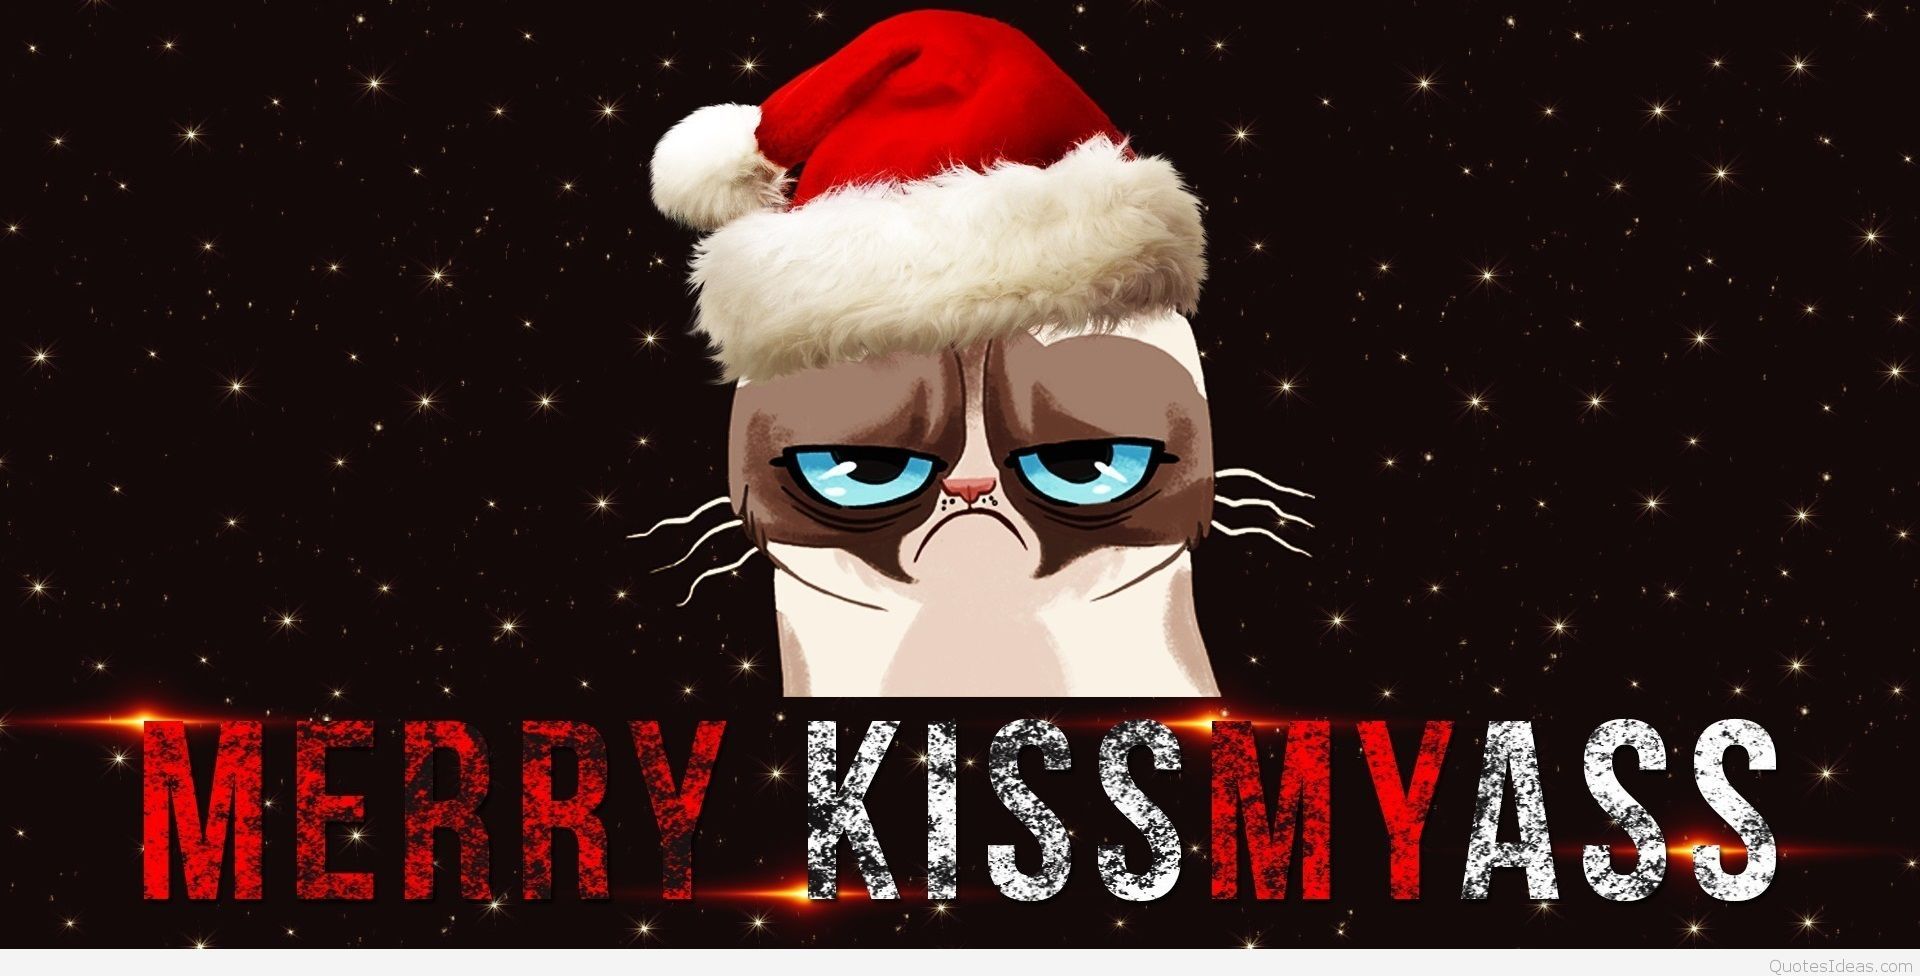 Funny Christmas Grumpy Cat Quotes, Messages 2015